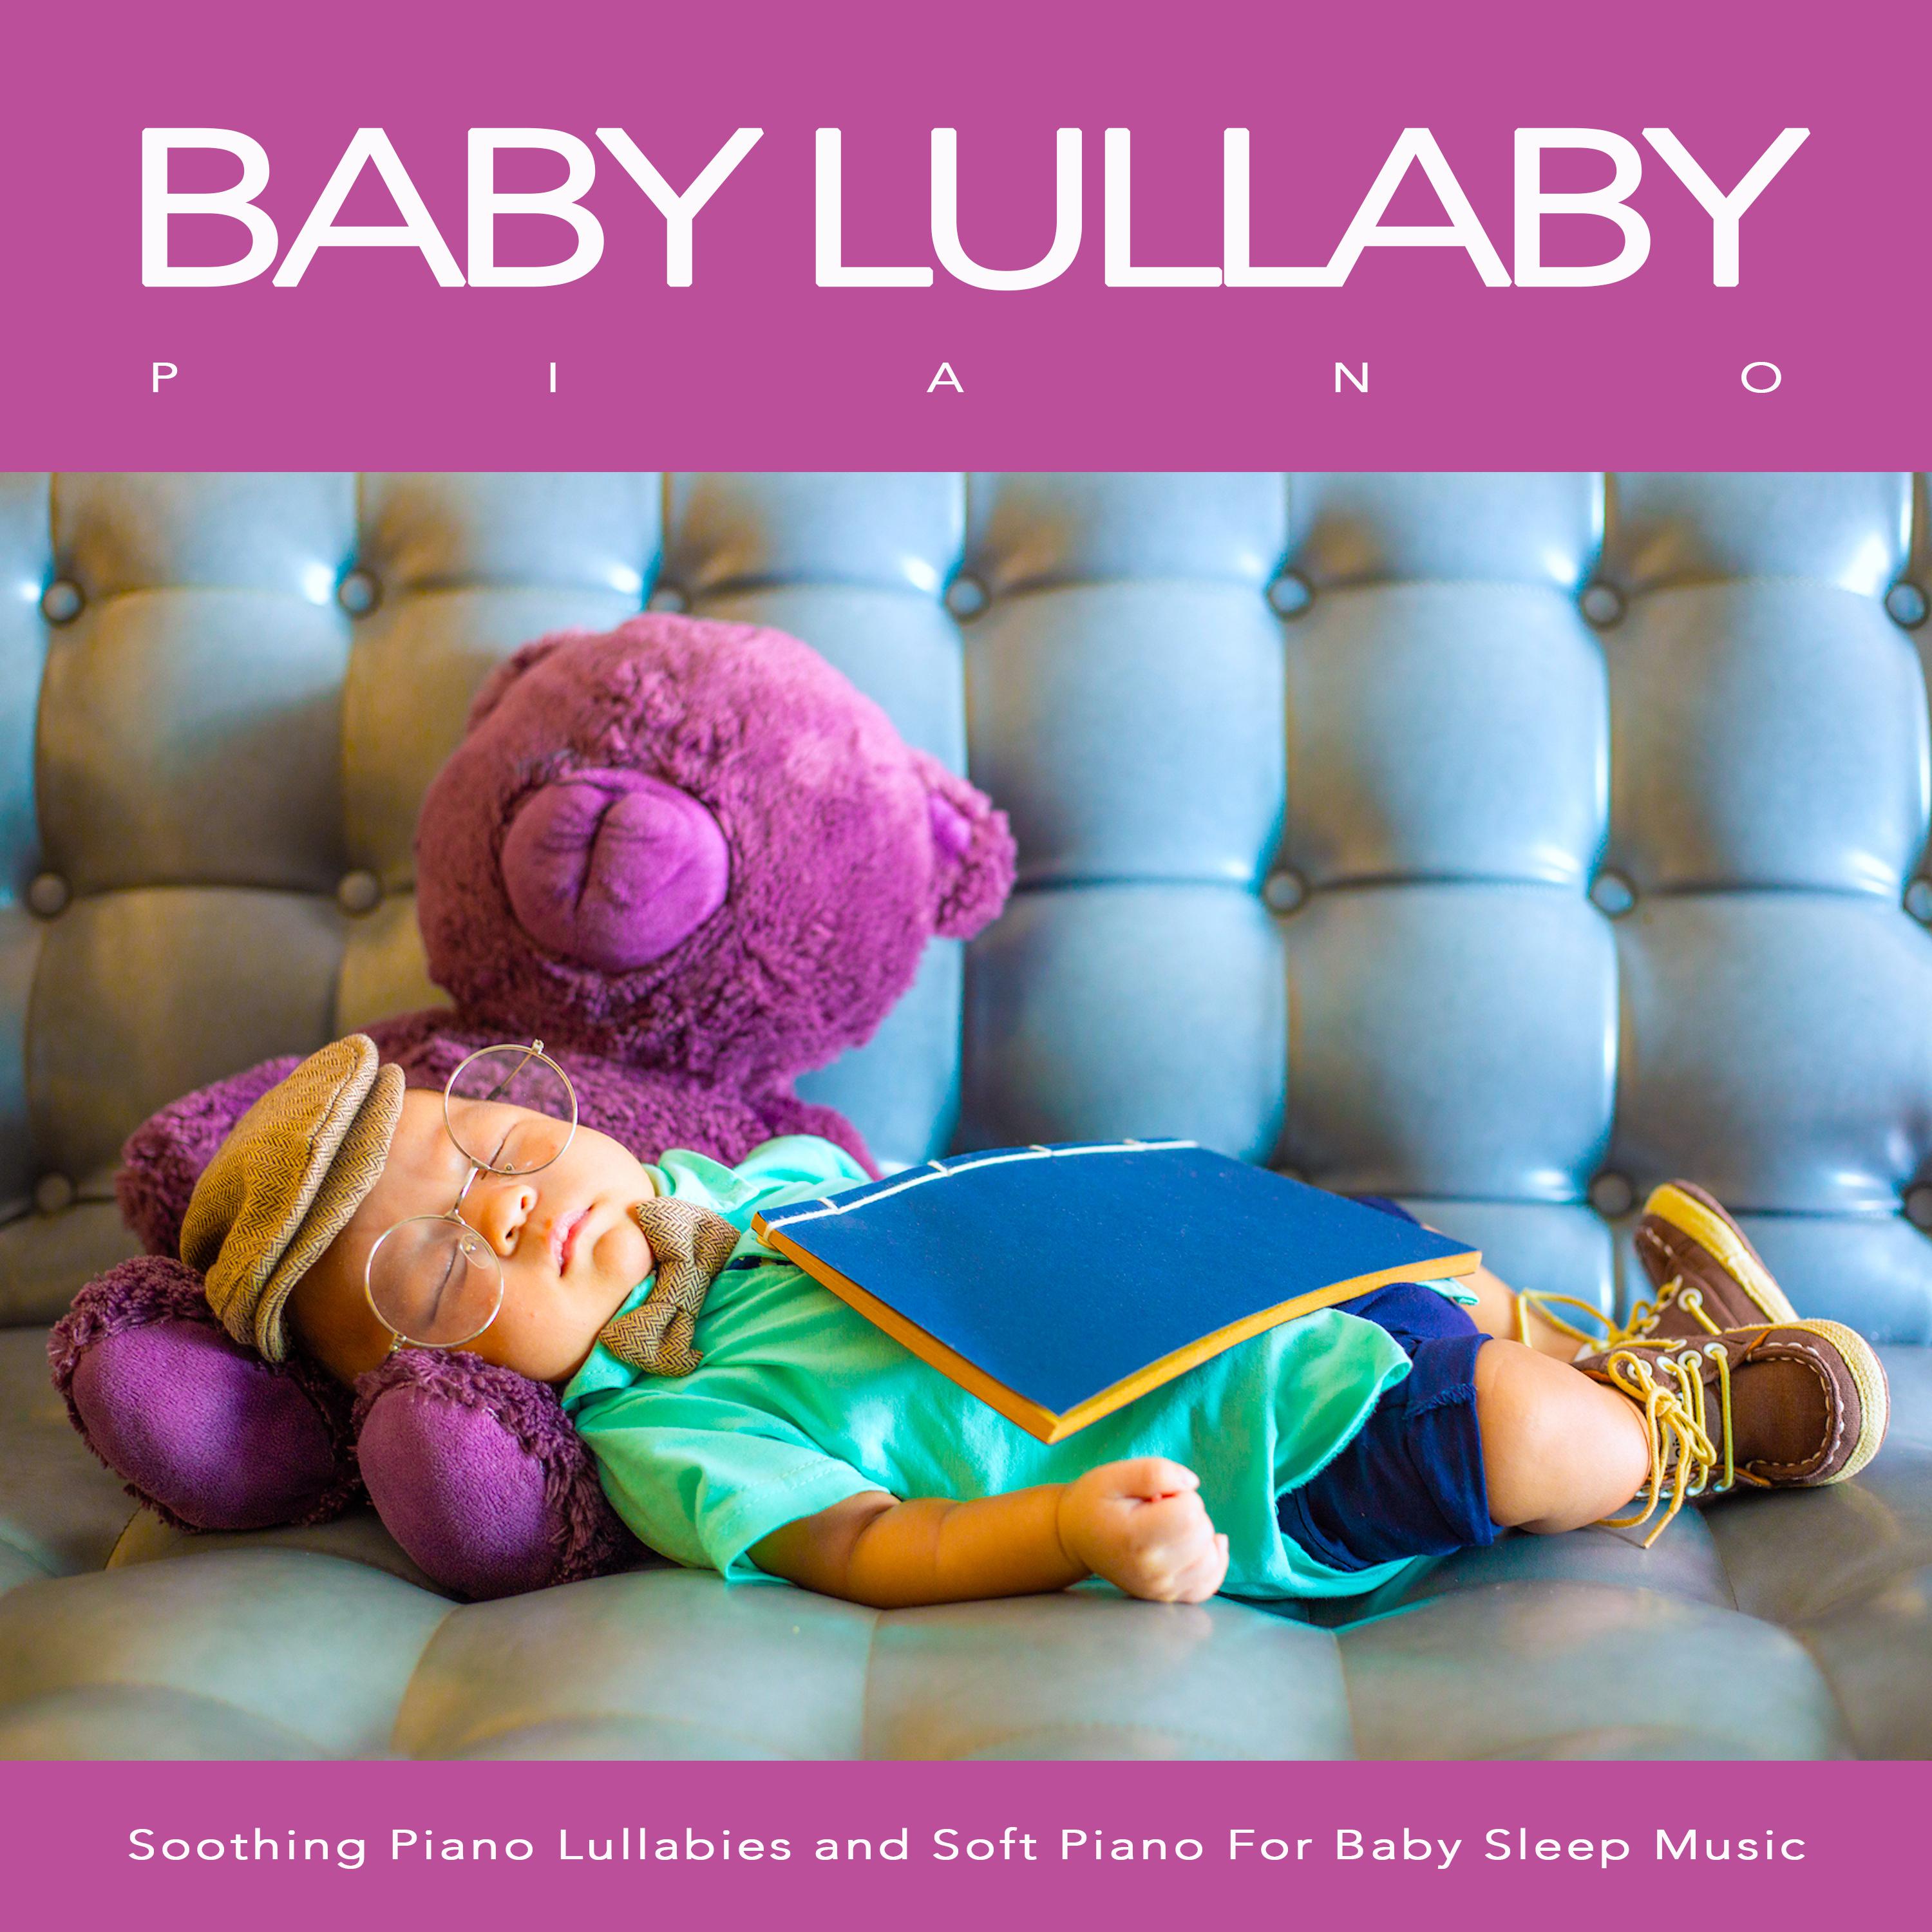 Baby Lullaby Piano: Soothing Piano Lullabies and Soft Piano For Baby Sleep Music